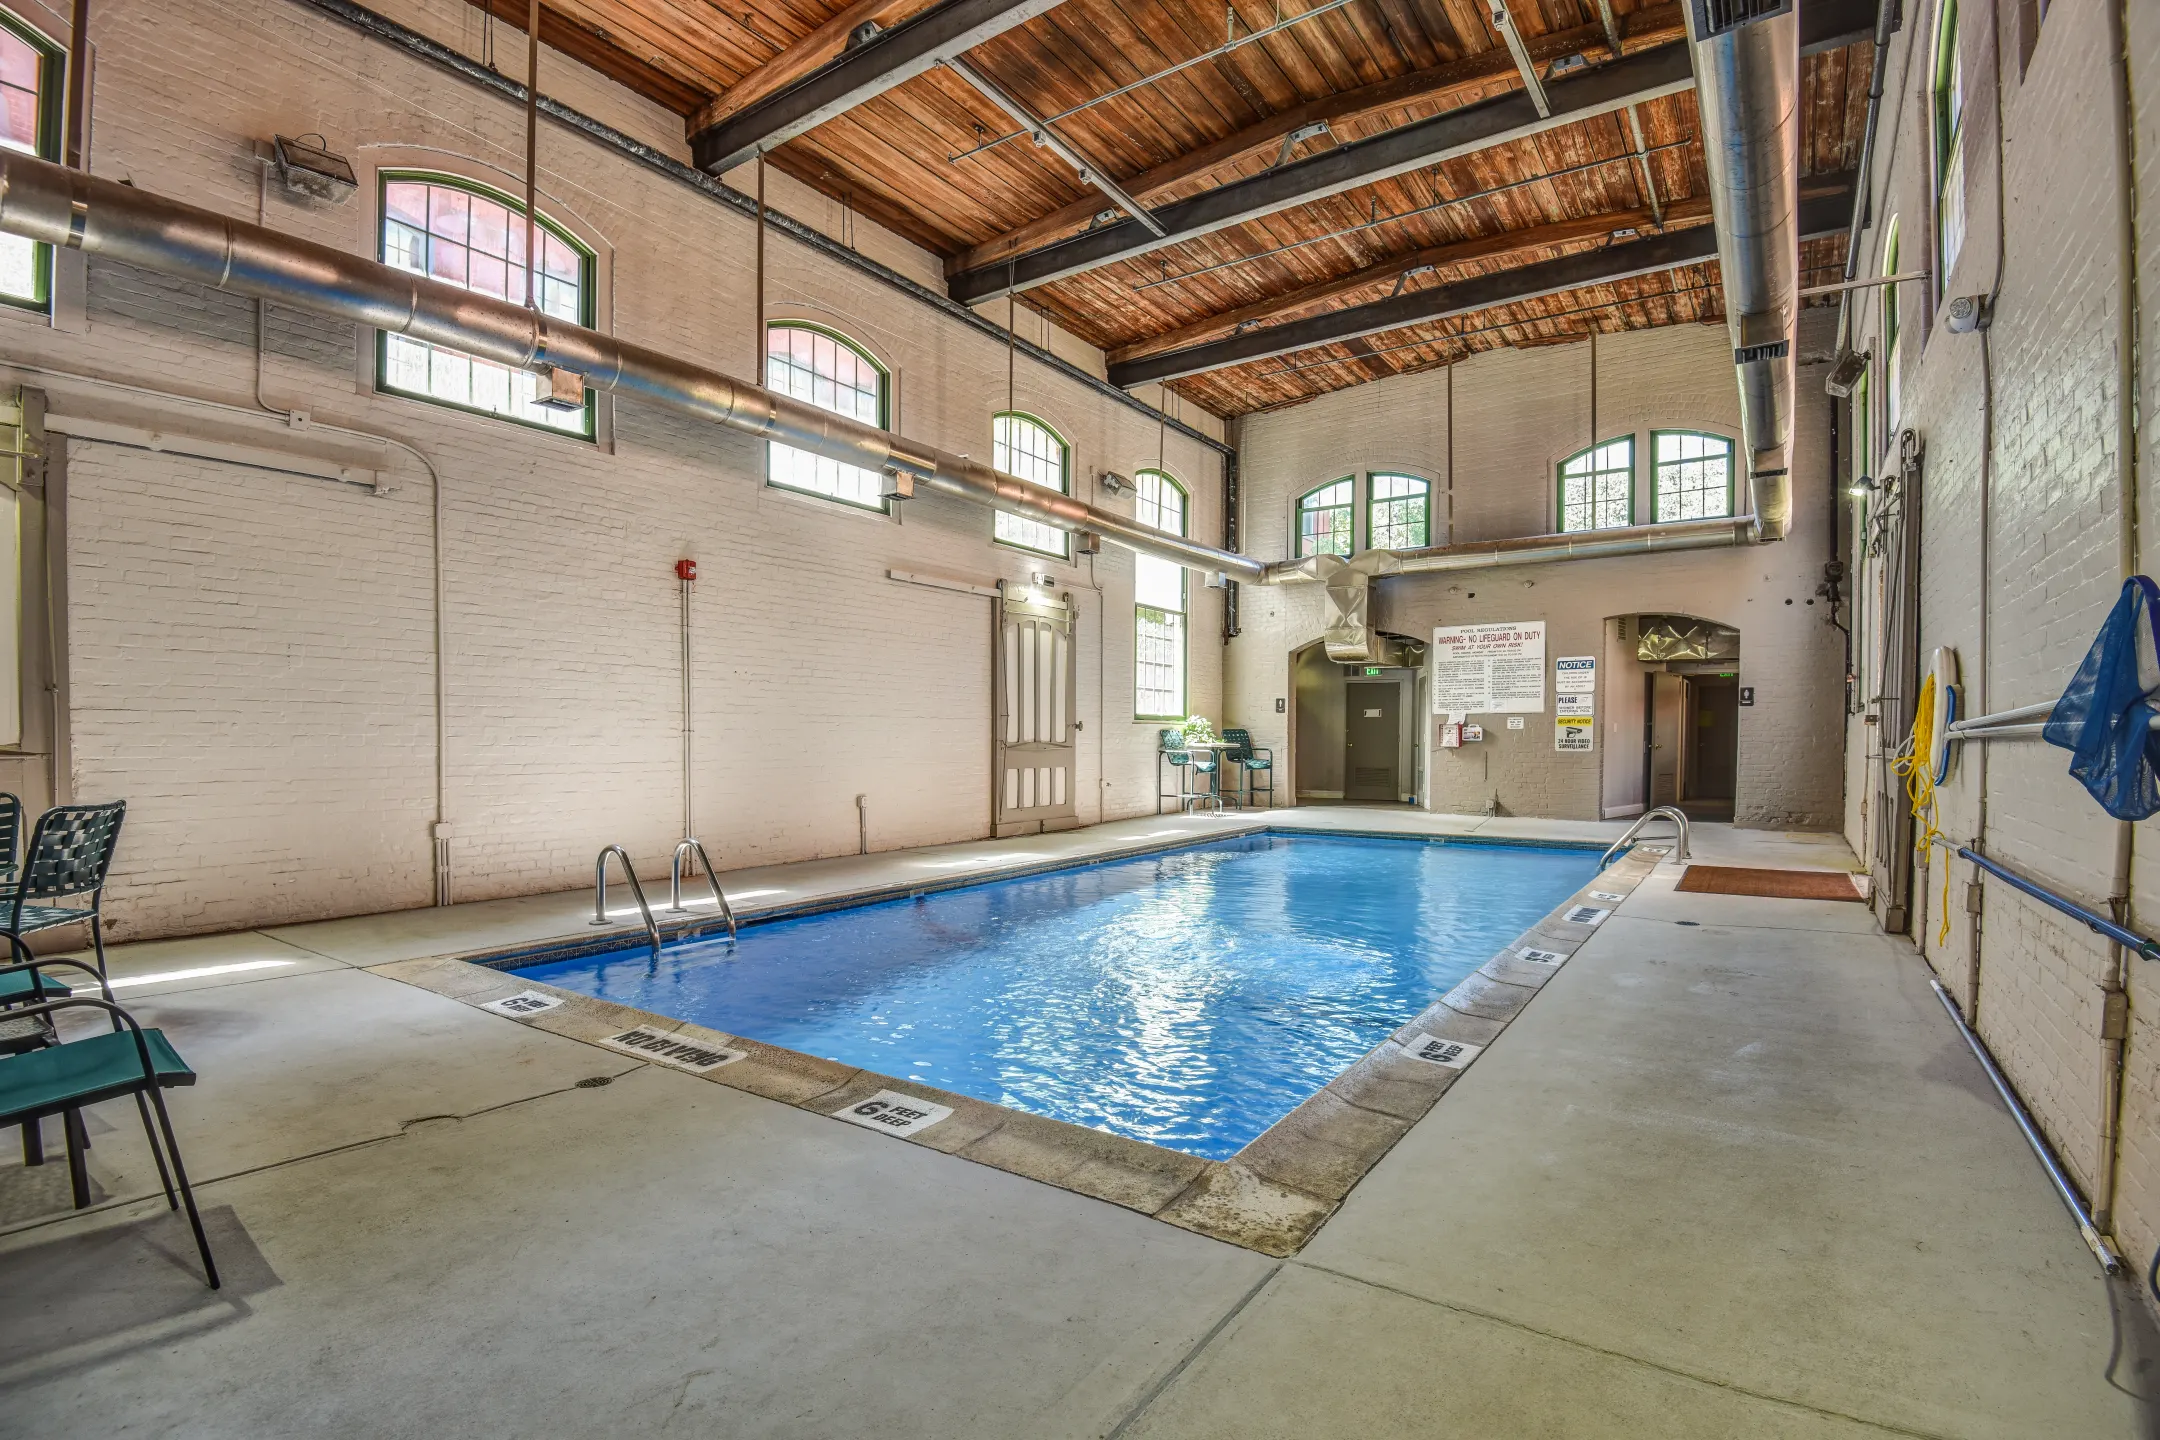 Pool - Ribbon Mill Apartments - Manchester, CT